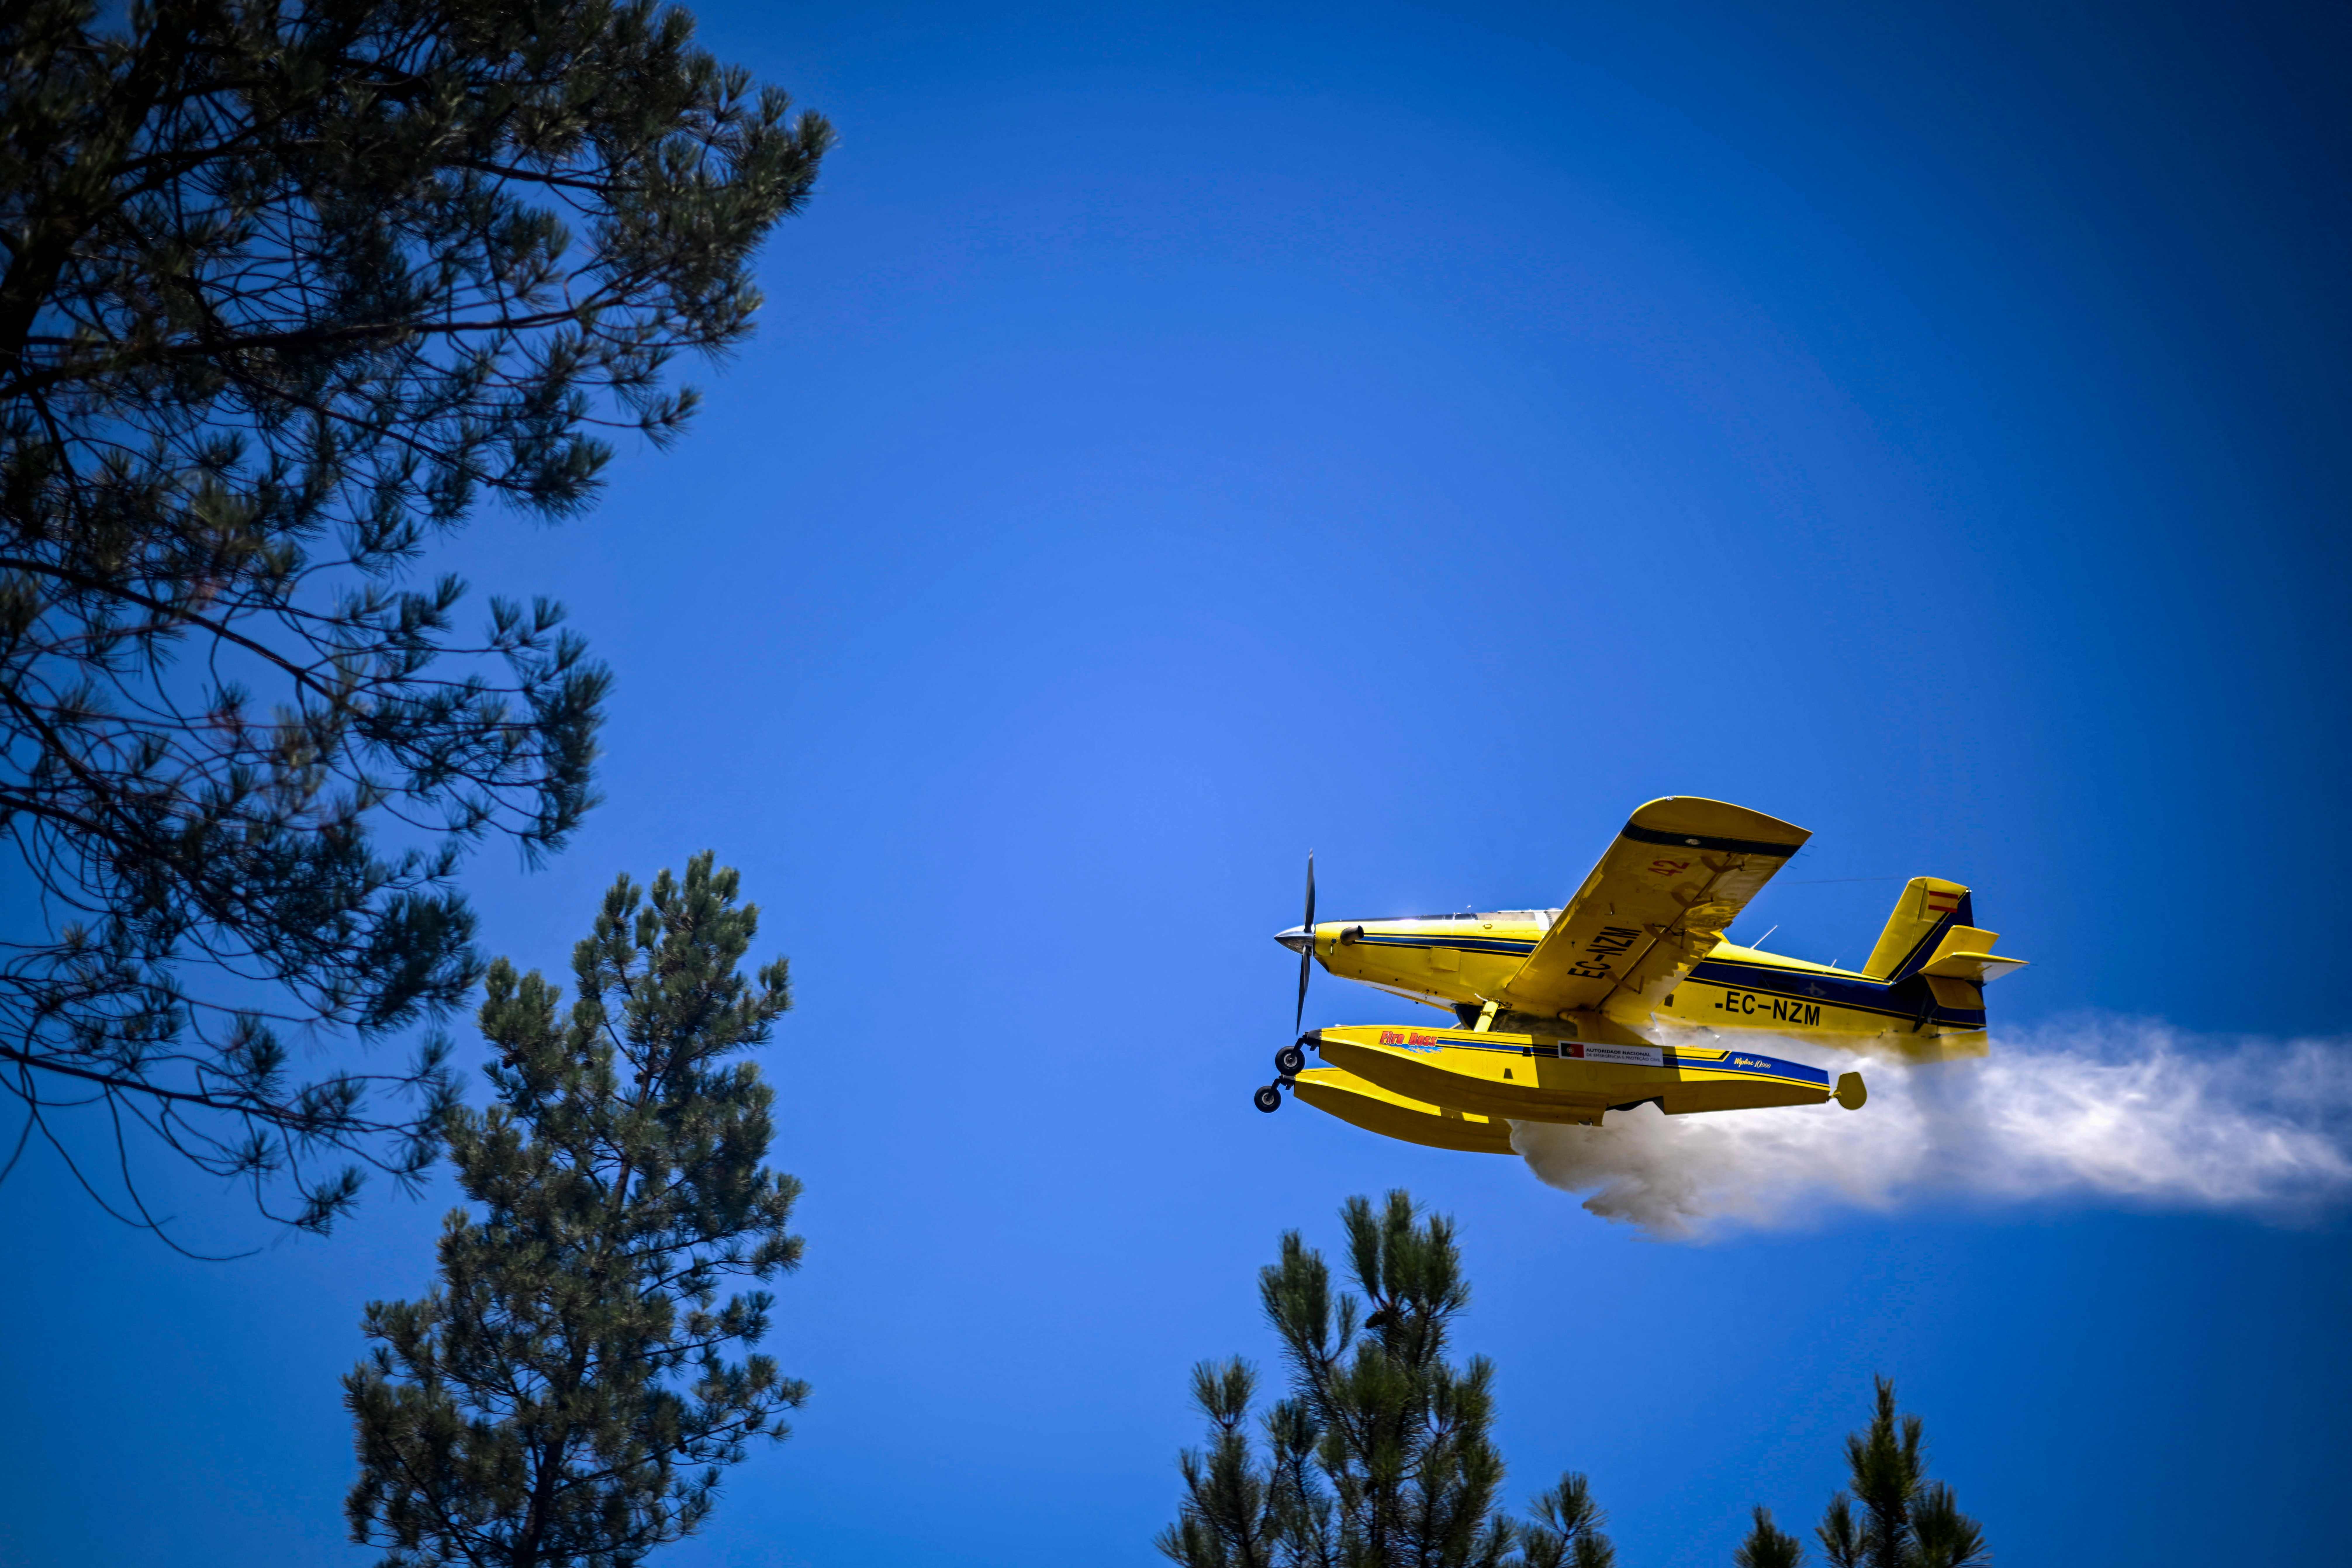 A firefighter airplane drops water in a wildfire in Carrascal, Proenca a Nova on 6 August